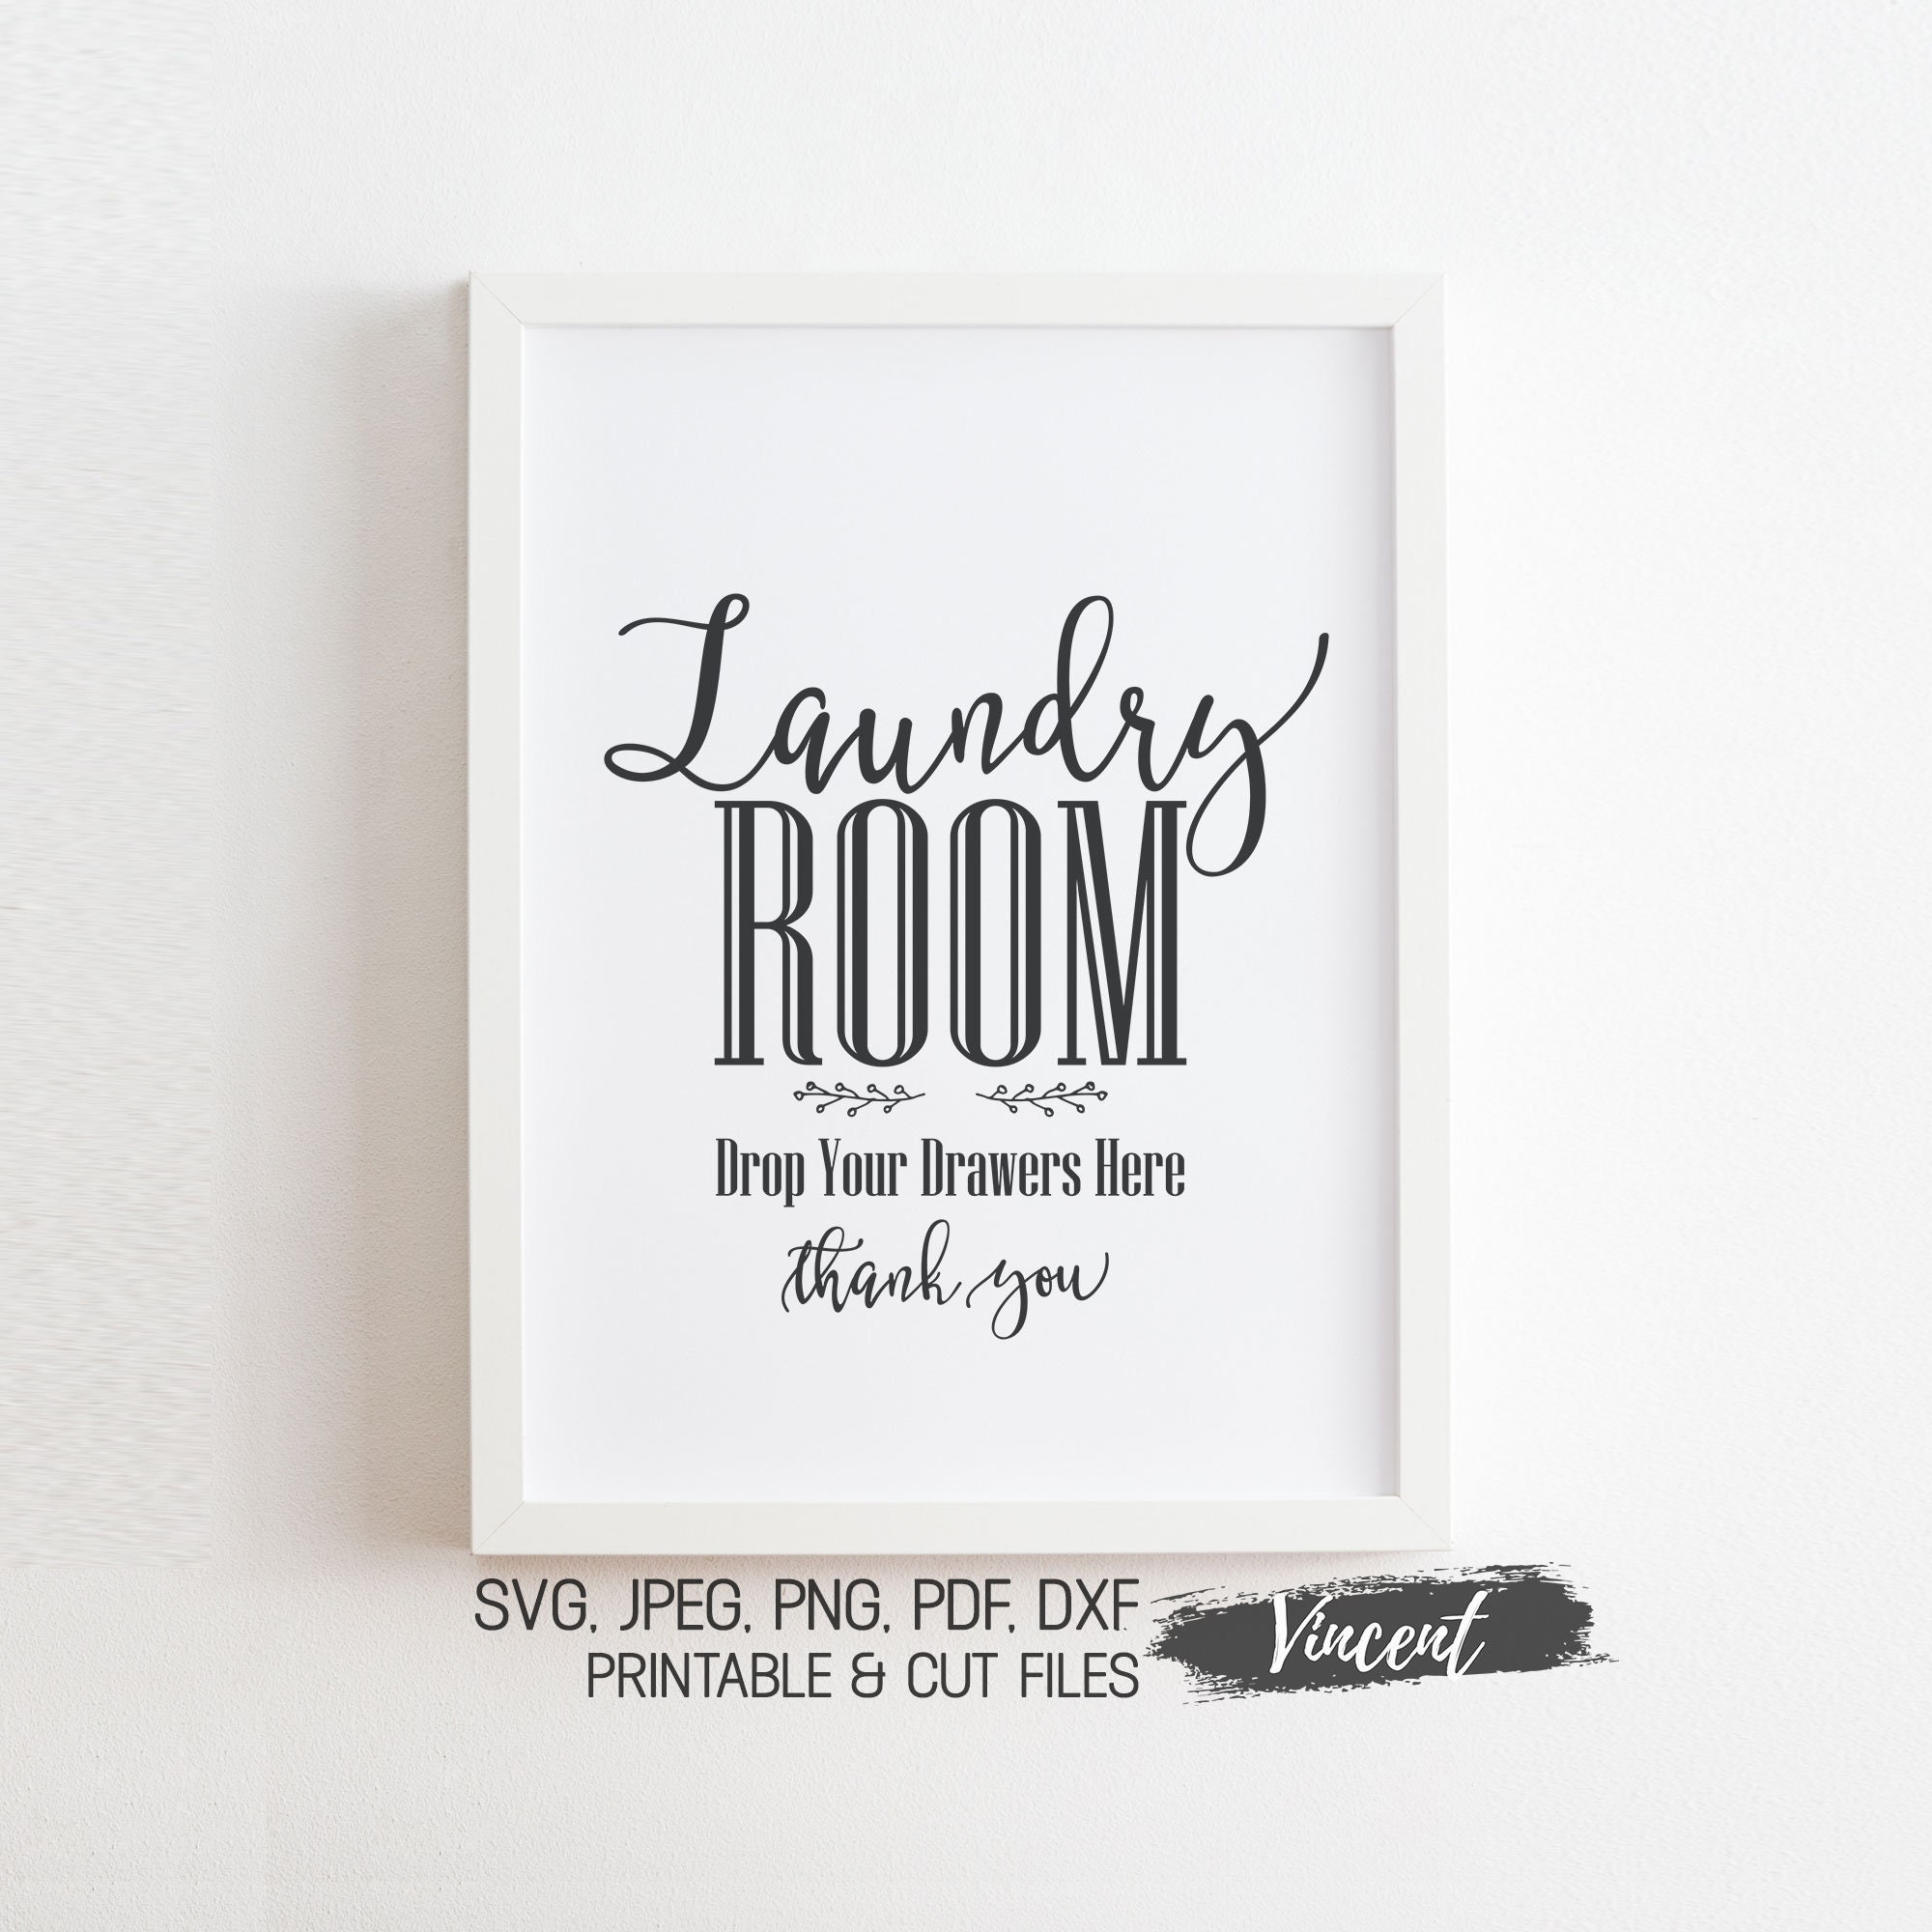 clothes pegs svg silhouette bathroom printable Dry laundry svg sign cut files for cricut laundry clip art printable laundry room decor